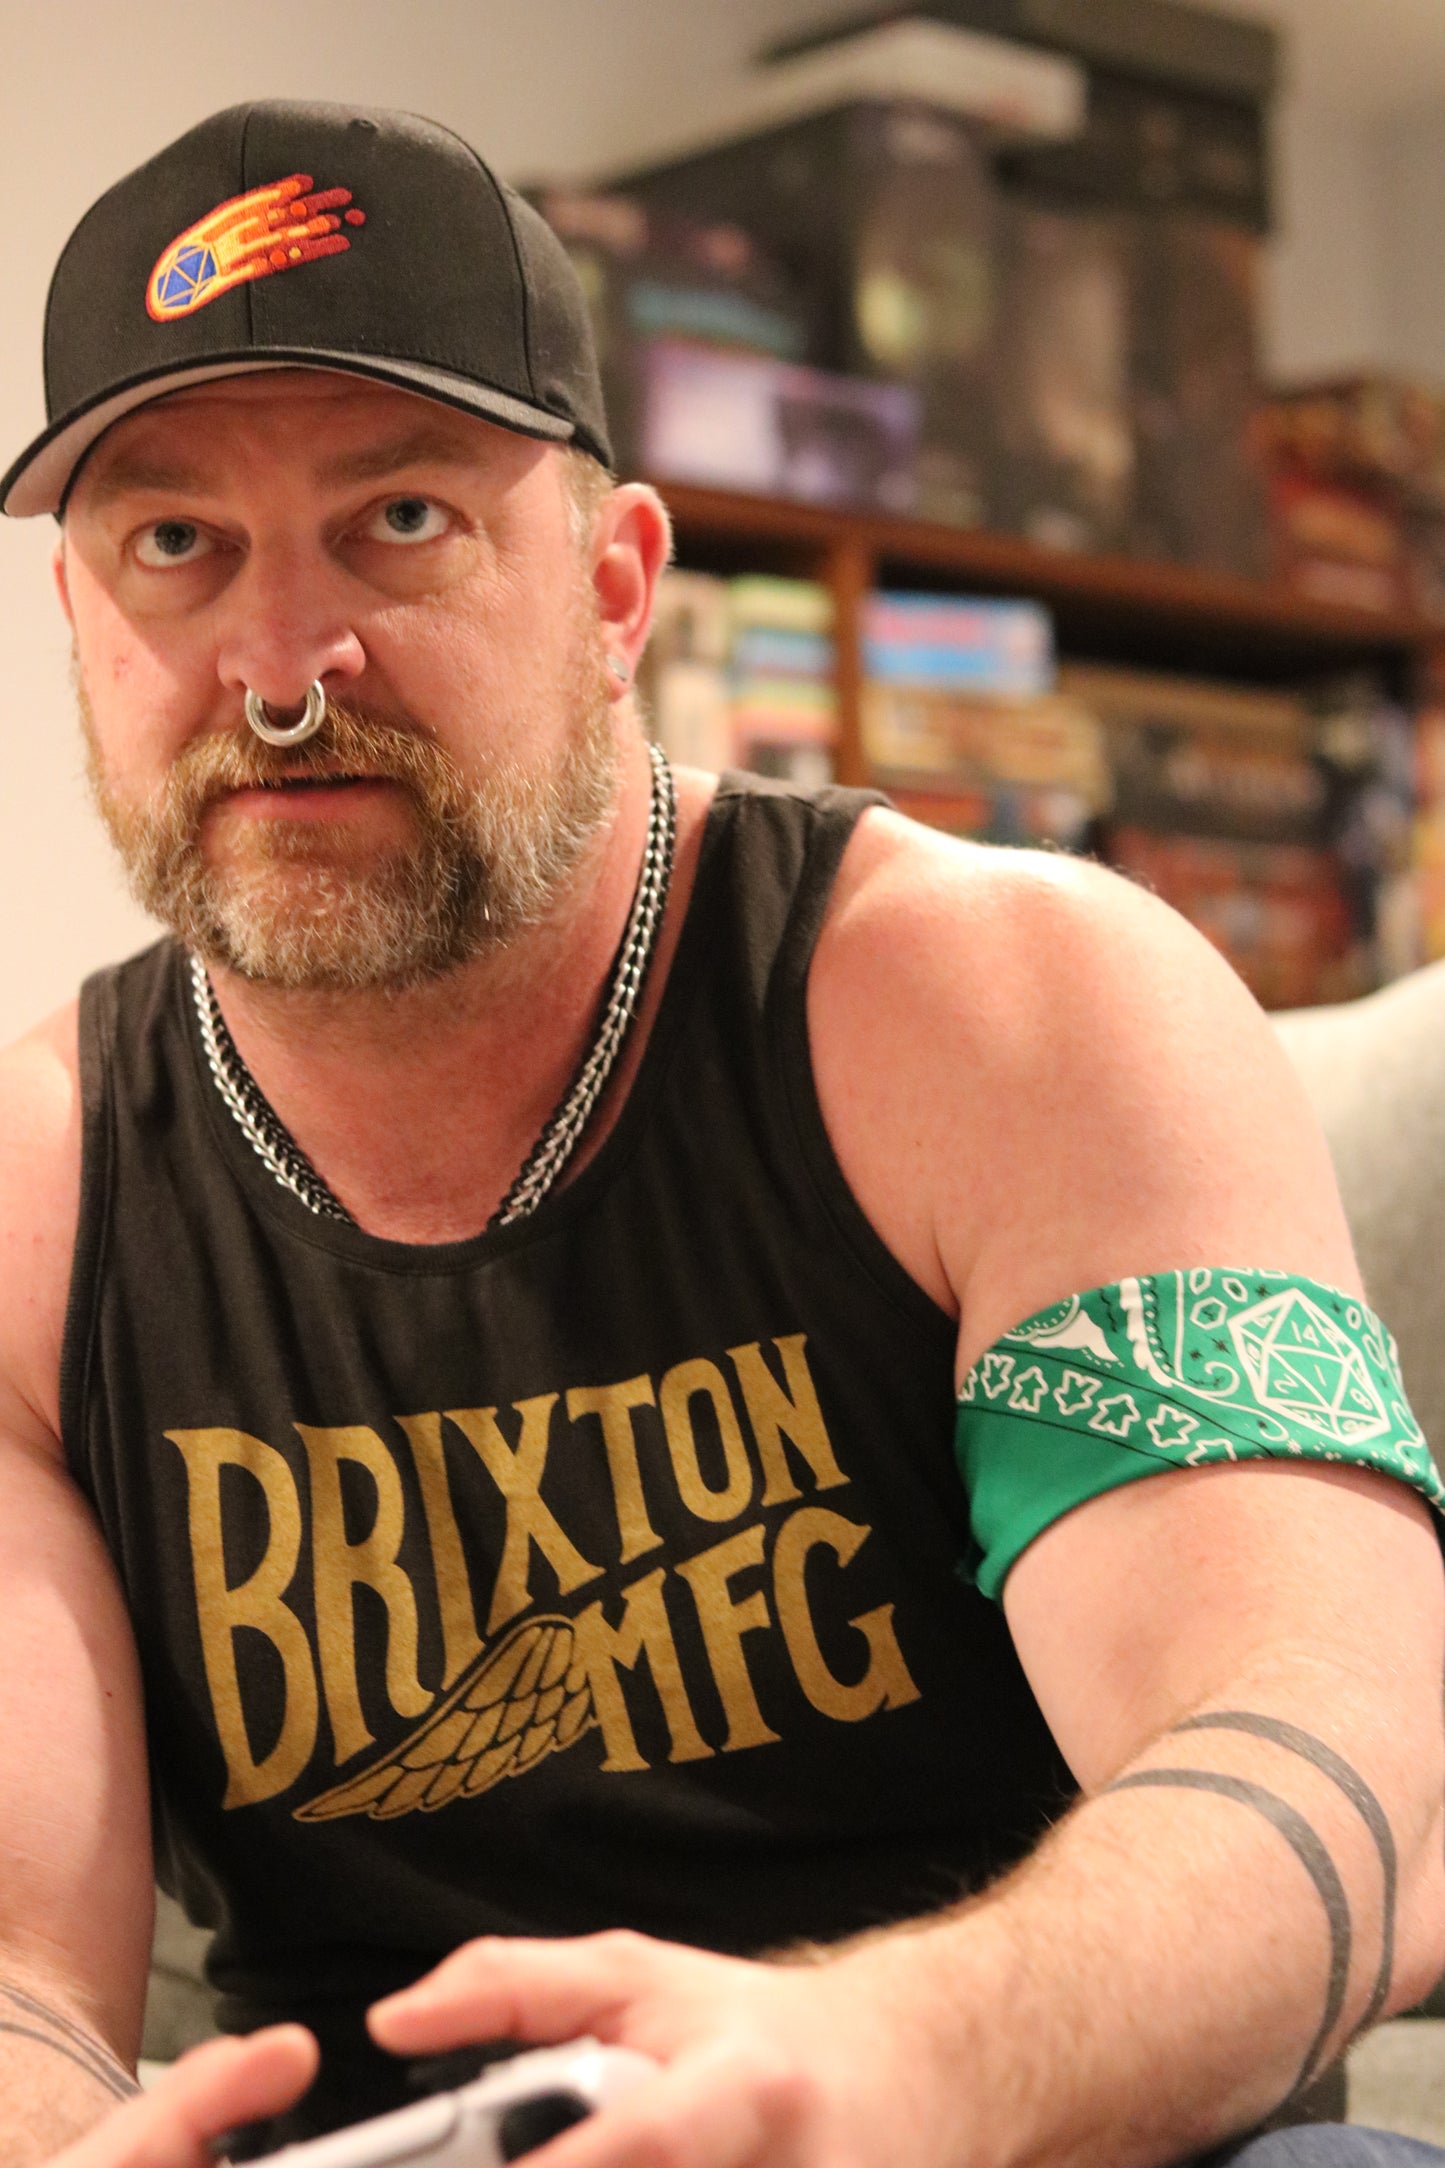 Brix, a handsome man with a beard and nose ring, wearing D20 comet themed hat, on his arm a green D20 dungeons and dragons themed bandana tied around.